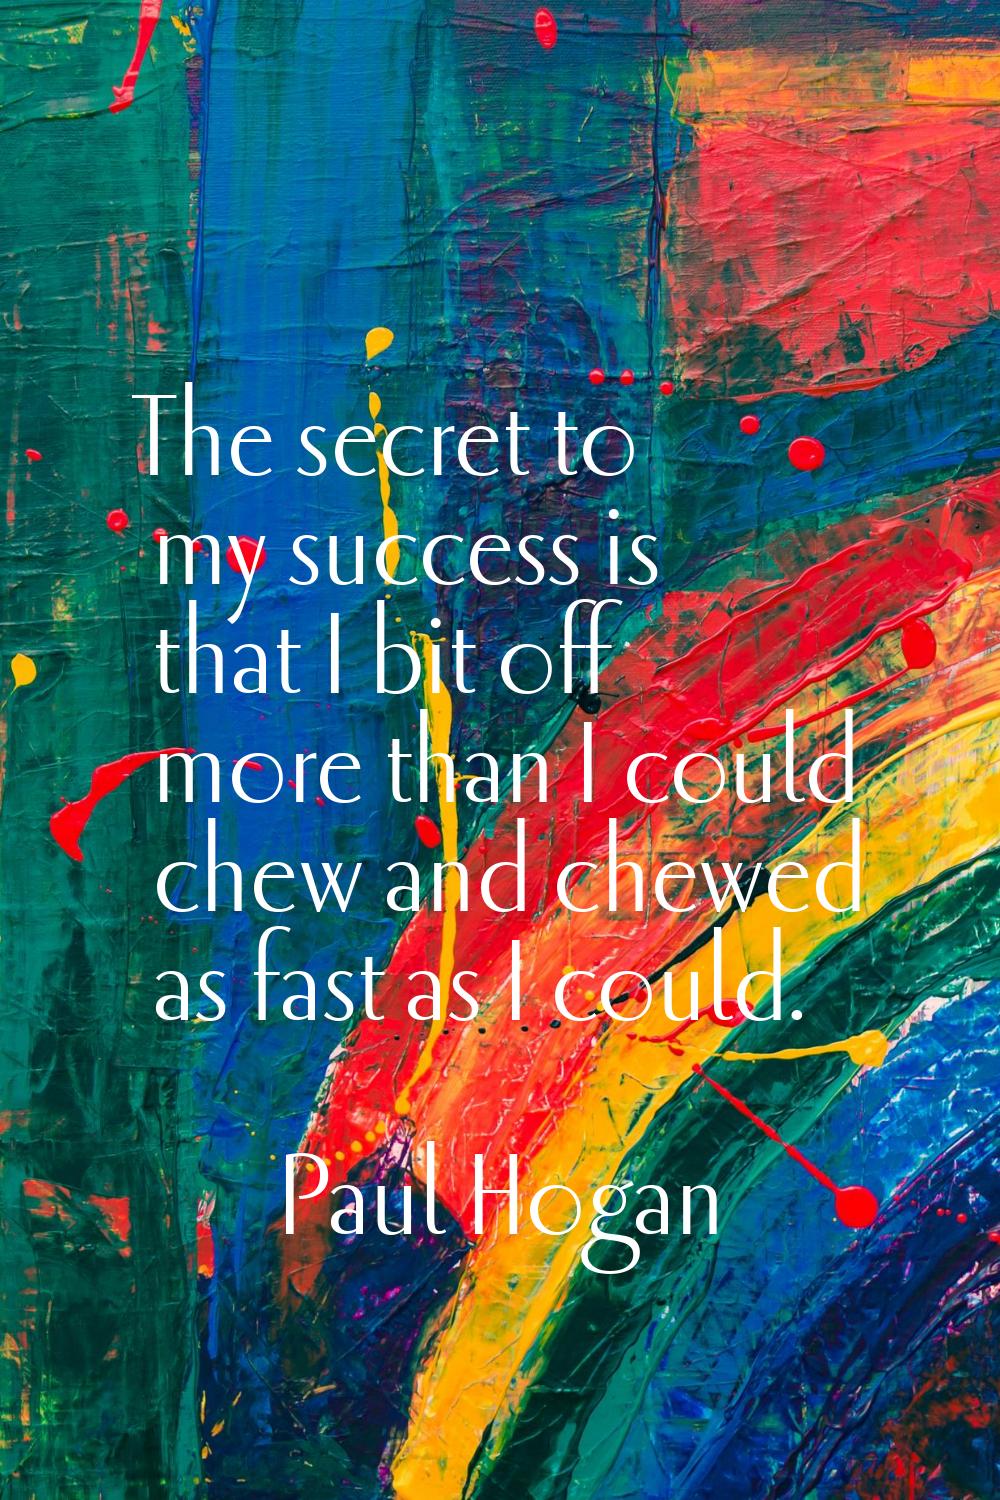 The secret to my success is that I bit off more than I could chew and chewed as fast as I could.